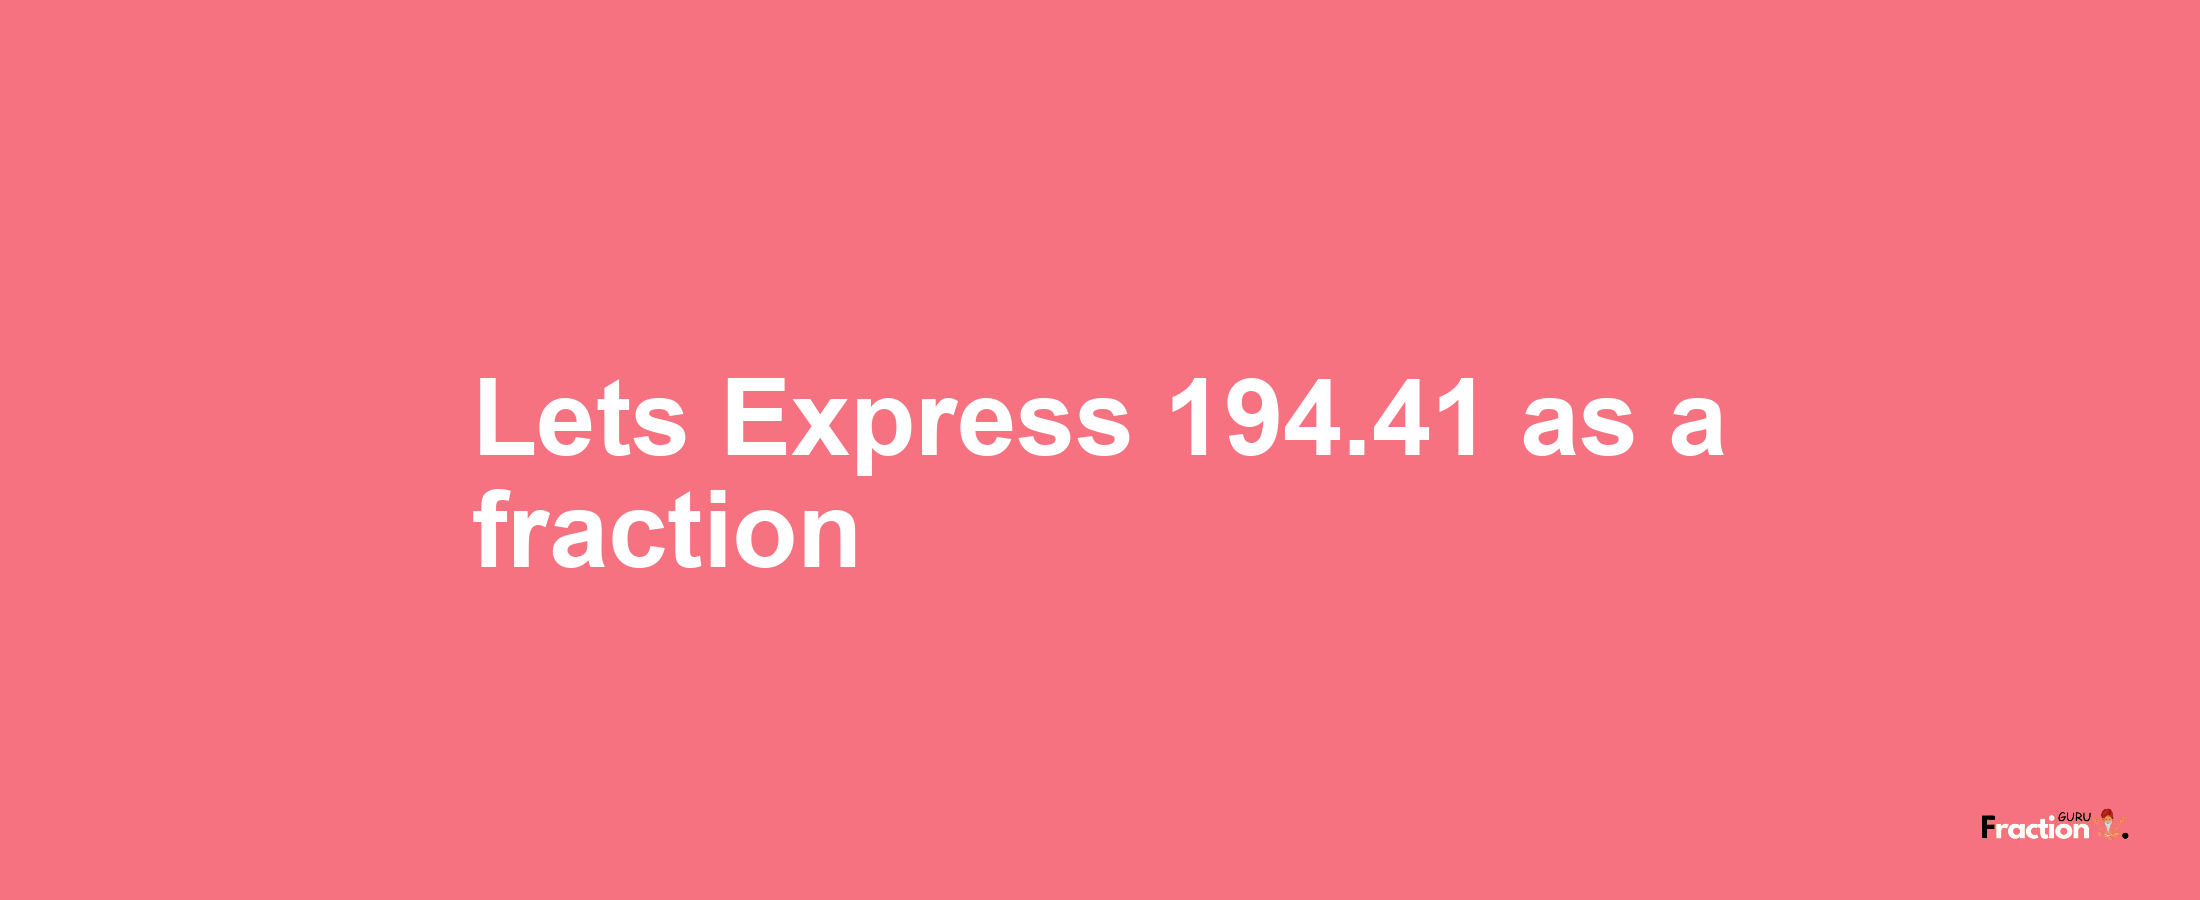 Lets Express 194.41 as afraction